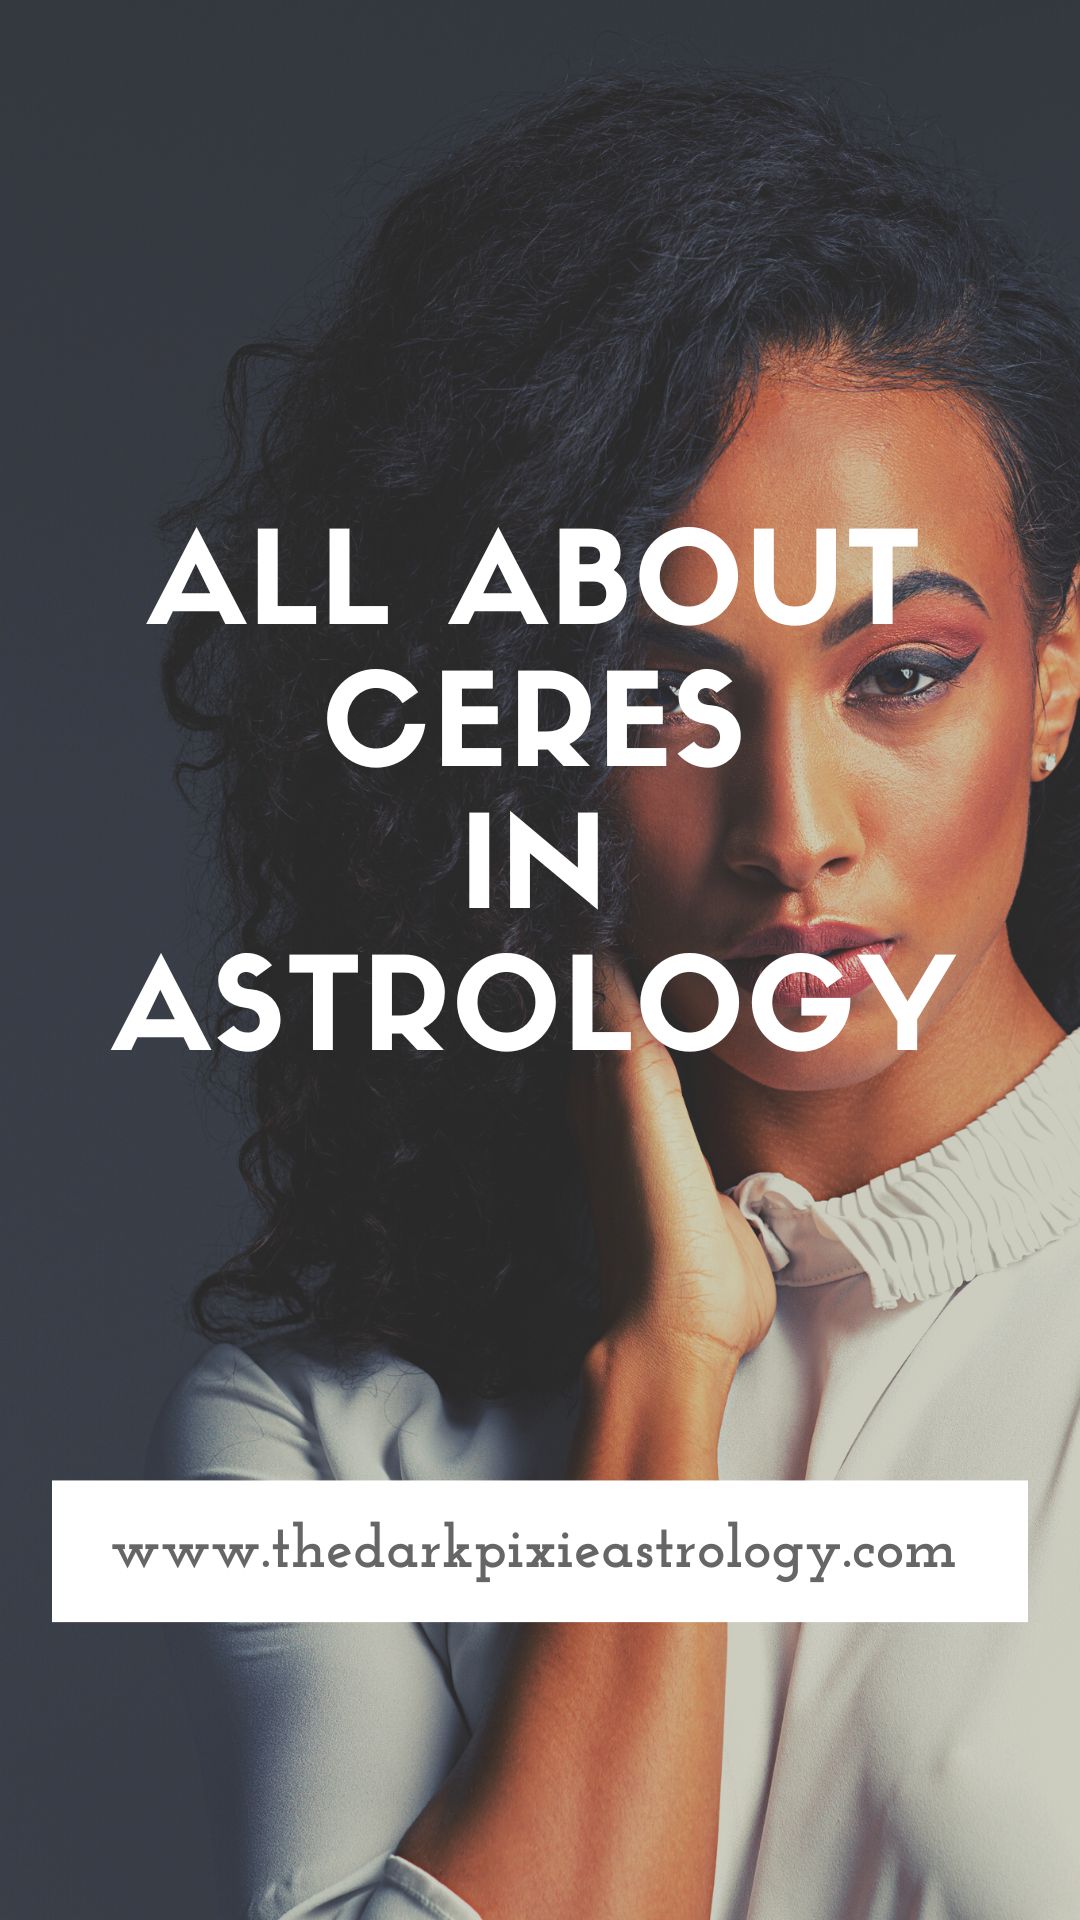 All About Ceres in Astrology - The Dark Pixie Astrology